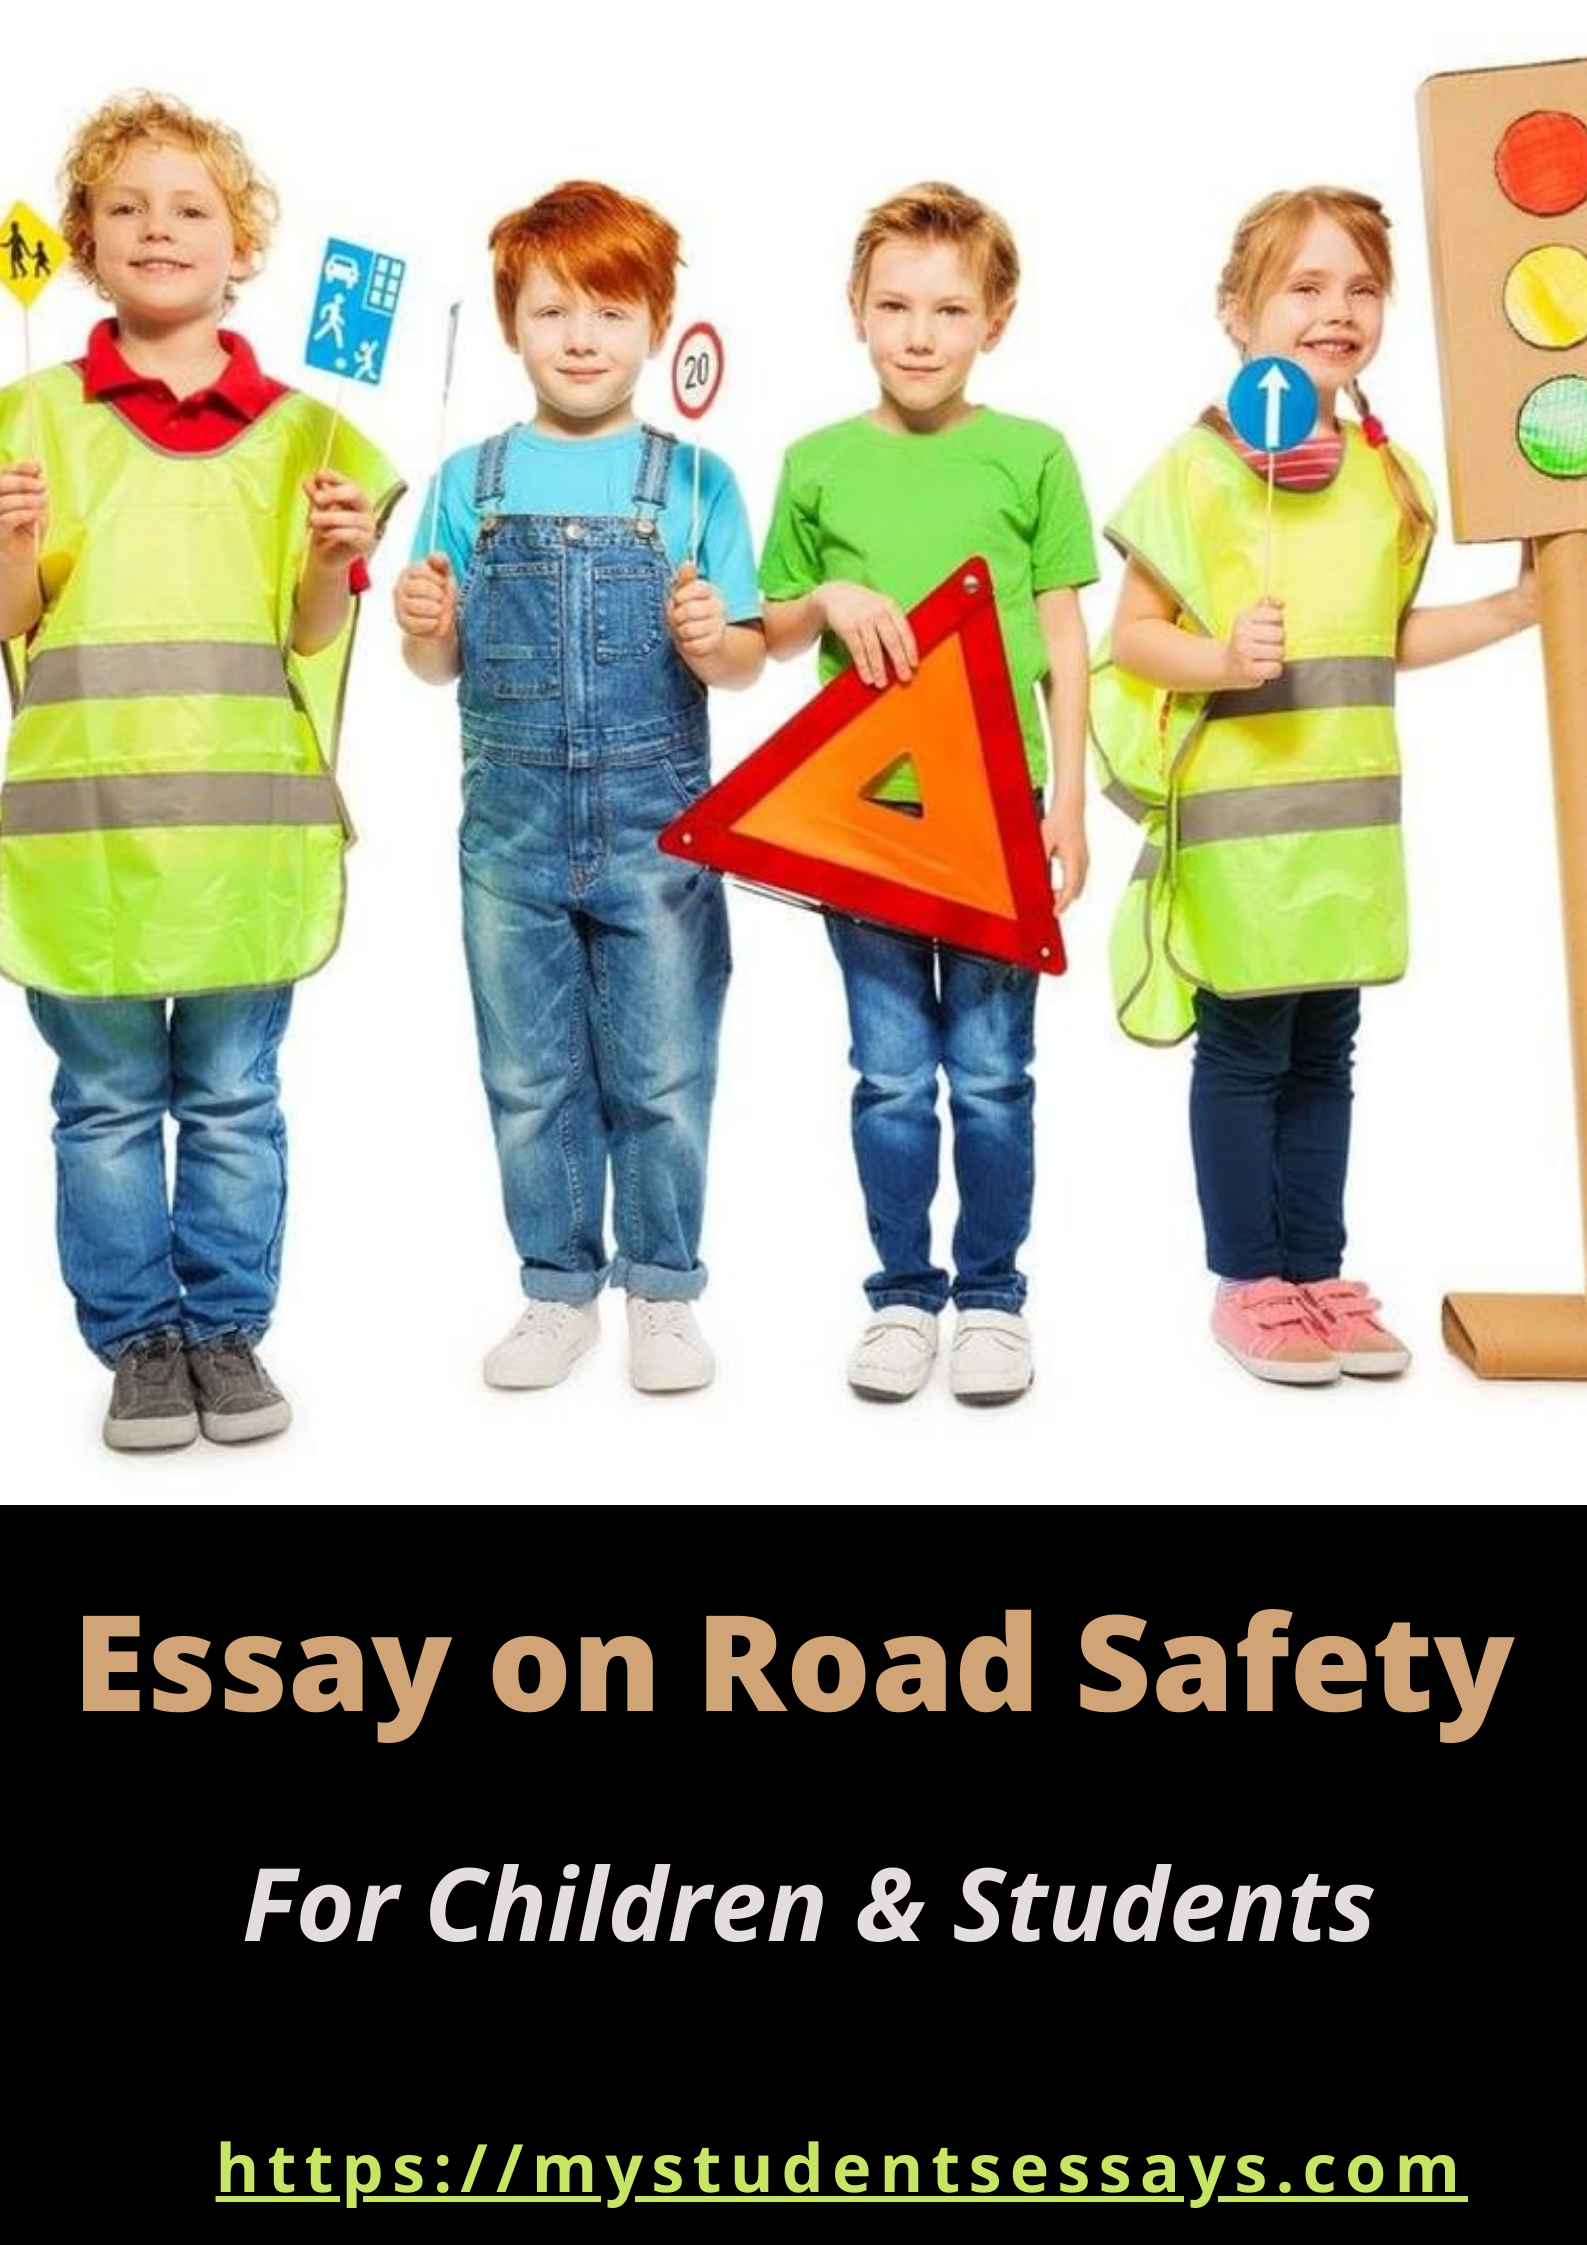 Essay on Road Safety For Children & Students